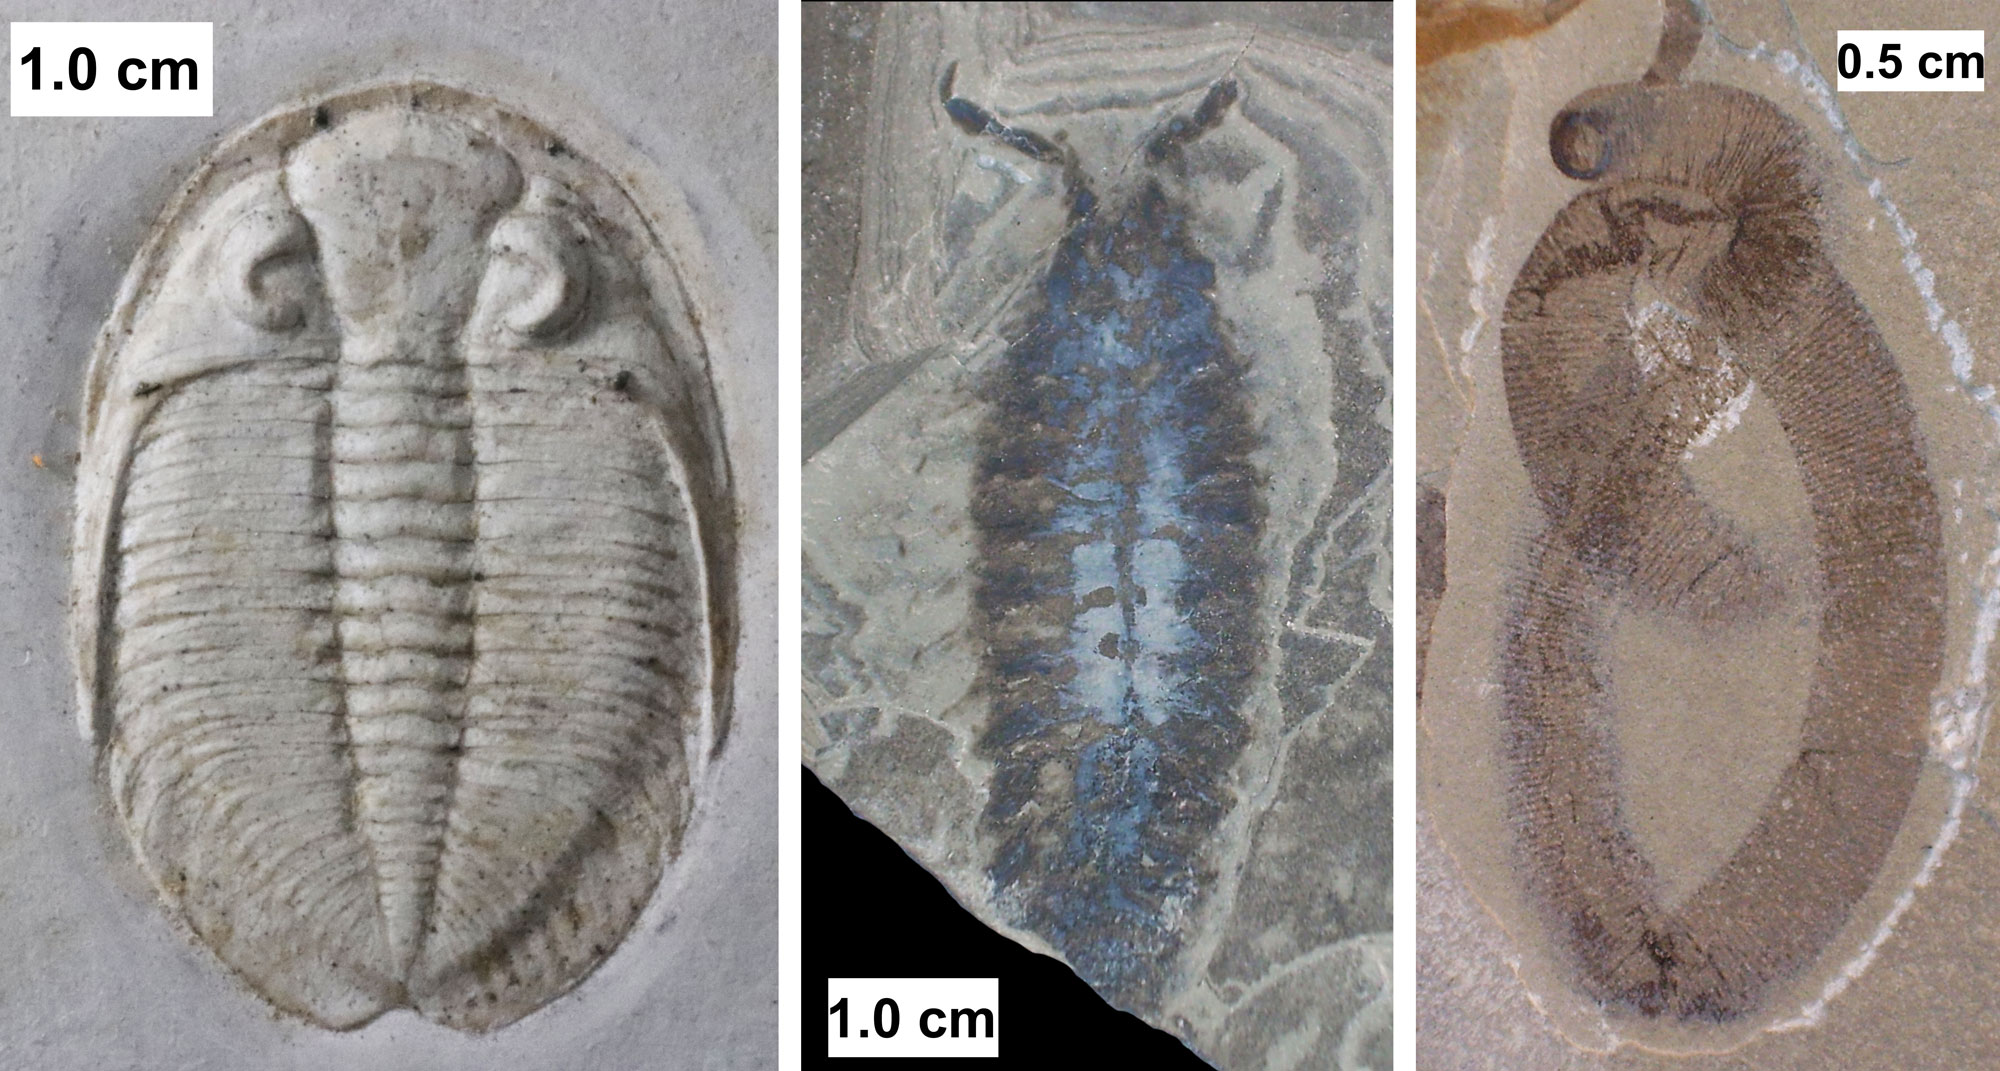 3-panel figure showing photos of animals from the Silurian Waukesha Biota of Wisconsin. Panel 1: Photo of a trilobite preserved in off-white rock. The trilobite is oriented vertically with its head toward the top of the image. The cephalon has two long, backwardly pointed spines. Panel 2: Photo of the arthropod Parioscorpio. The arthropod is oriented vertically with its head toward the top of the image. It has two appendage emerging from the head, and multiple body segments. Panel 3: Photo of a worm identified as a possible leech. The photo shows an impression of a worm on brown stone. The worm's body is folded over on itself, and it has a series of horizontally oriented dark brown bands on it.